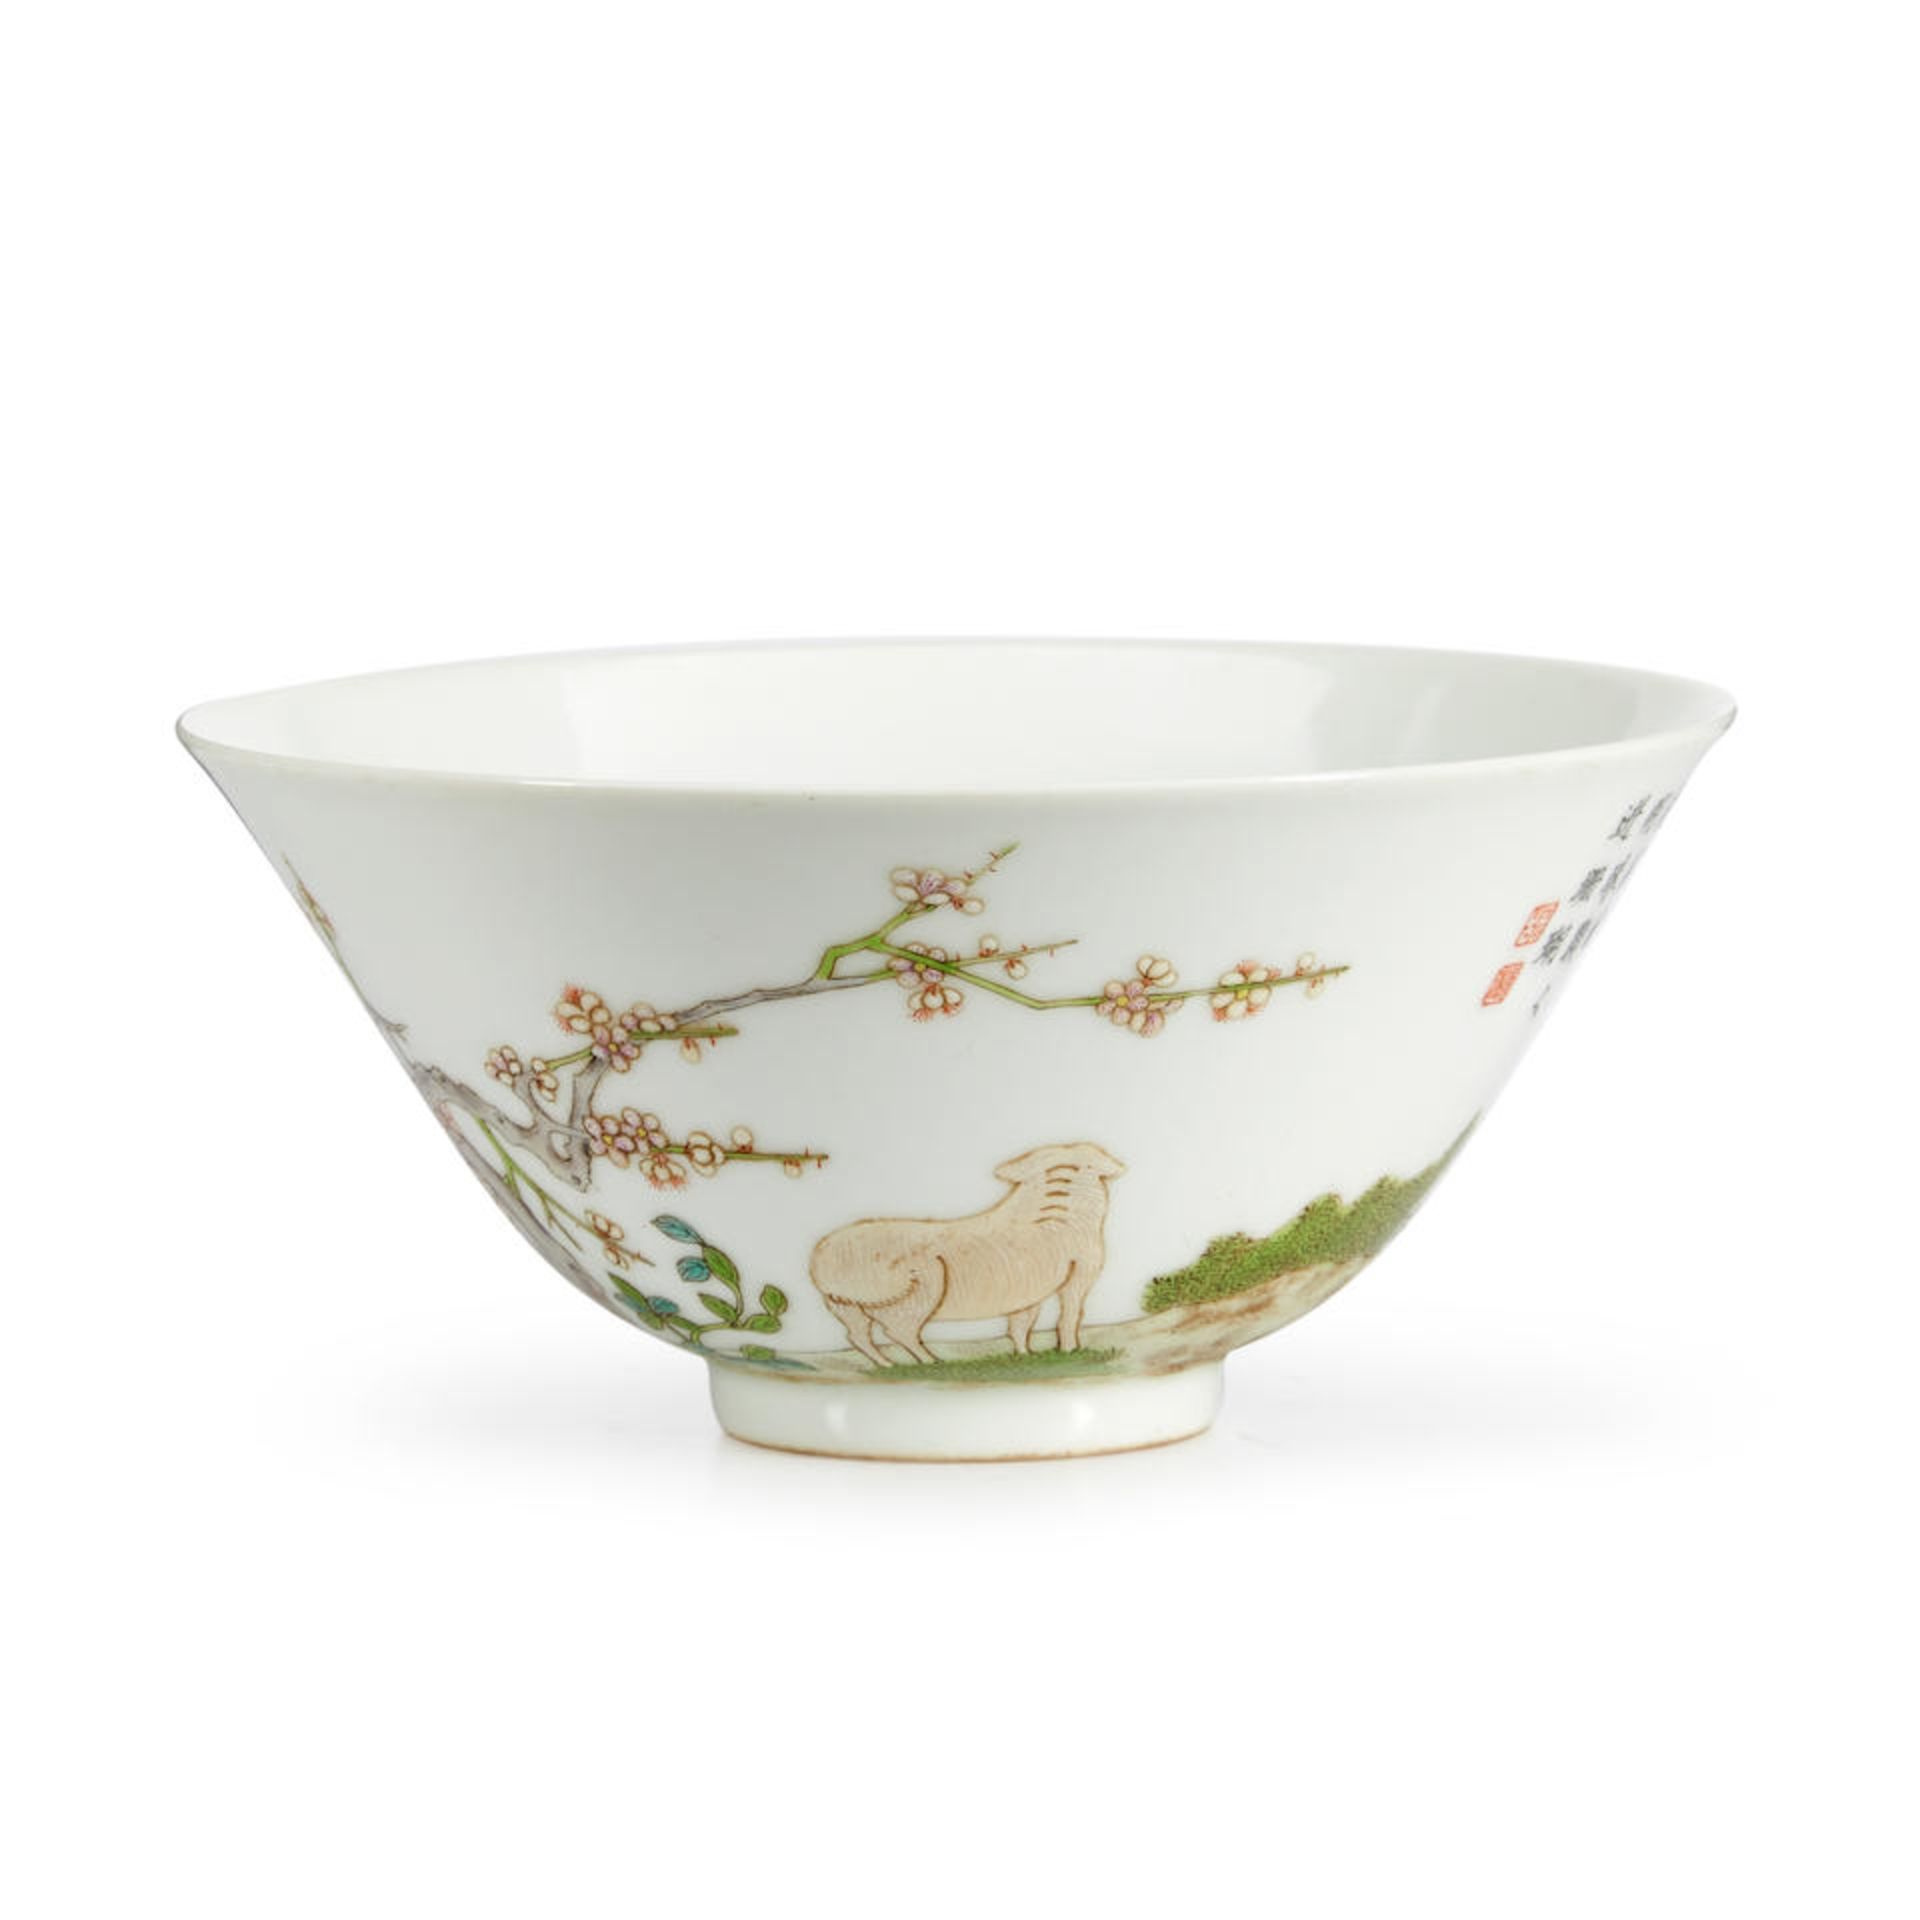 A FAMILLE ROSE 'THREE RAMS' BOWL - Image 5 of 6